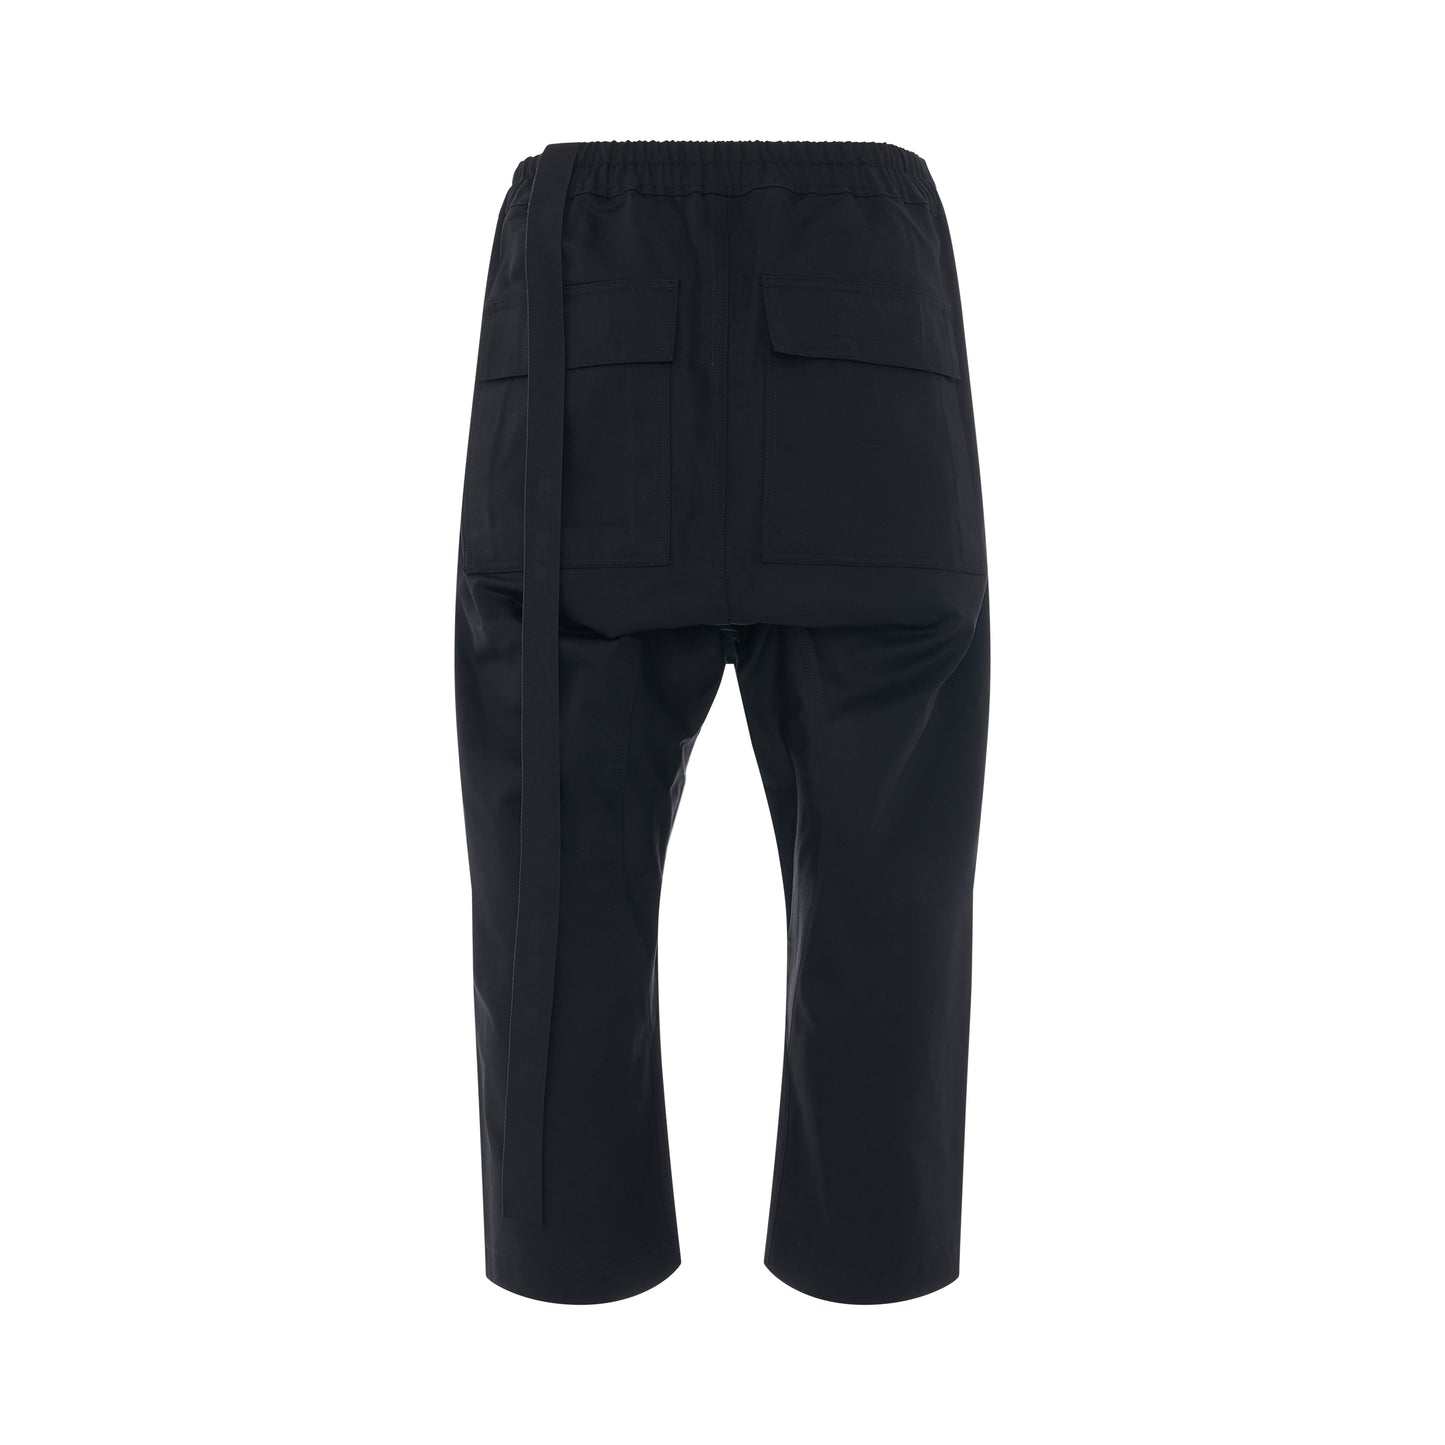 DRKSHDW Cargo Drawstring Cropped Pants in Cotton Twill